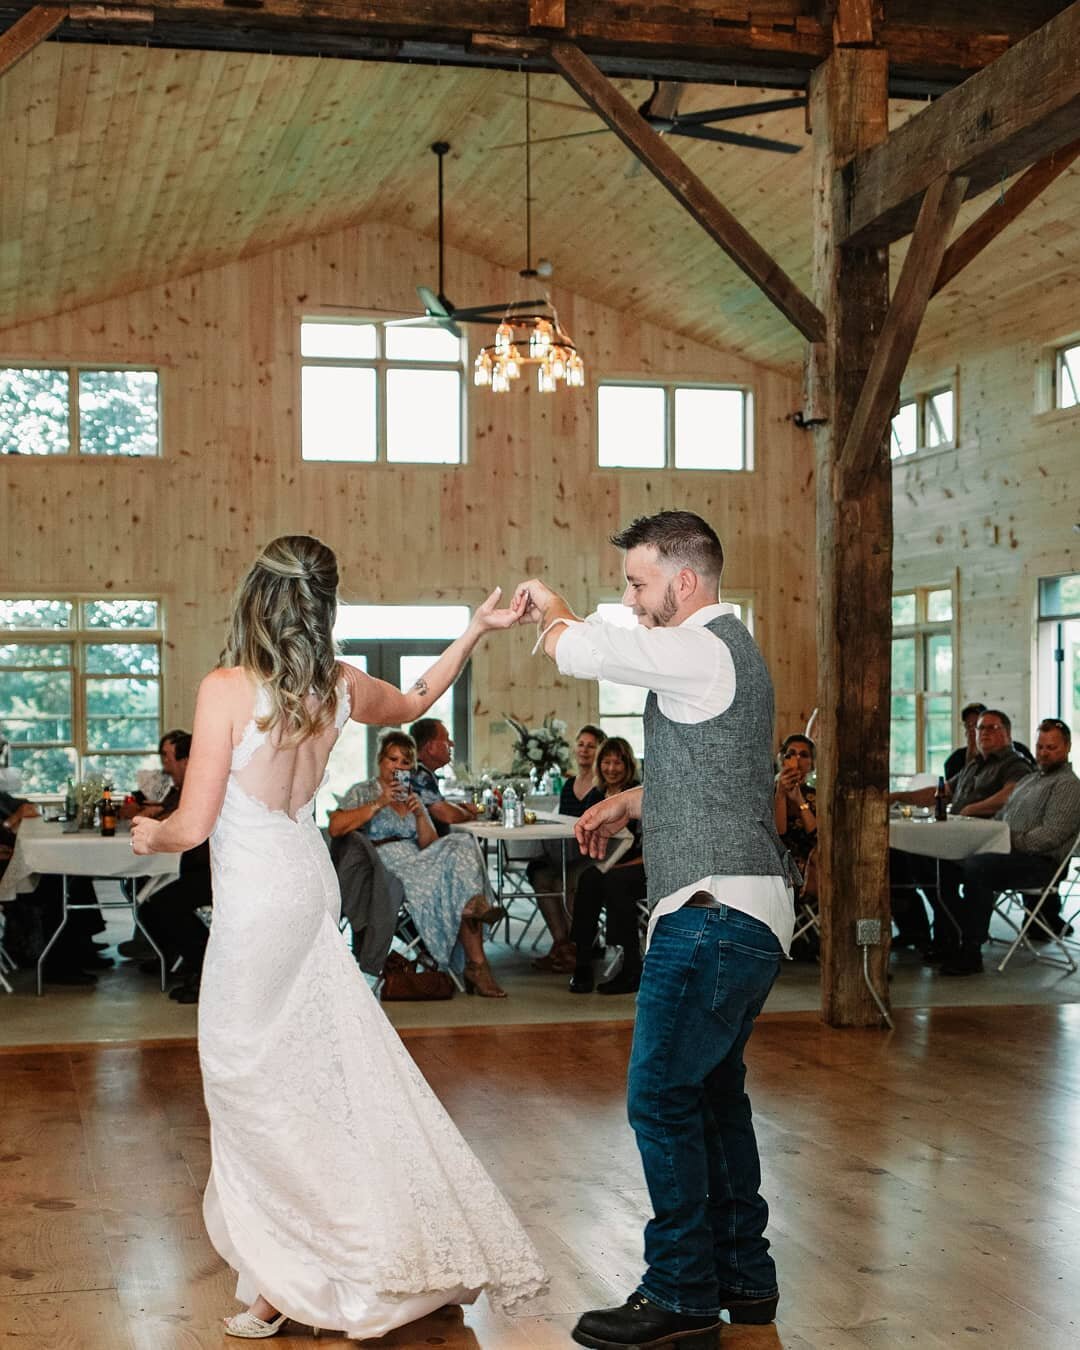 Dancing into the new year here at Bluebird!

📸: @jess_gregg_photo 
👰🏼: @kellemay01